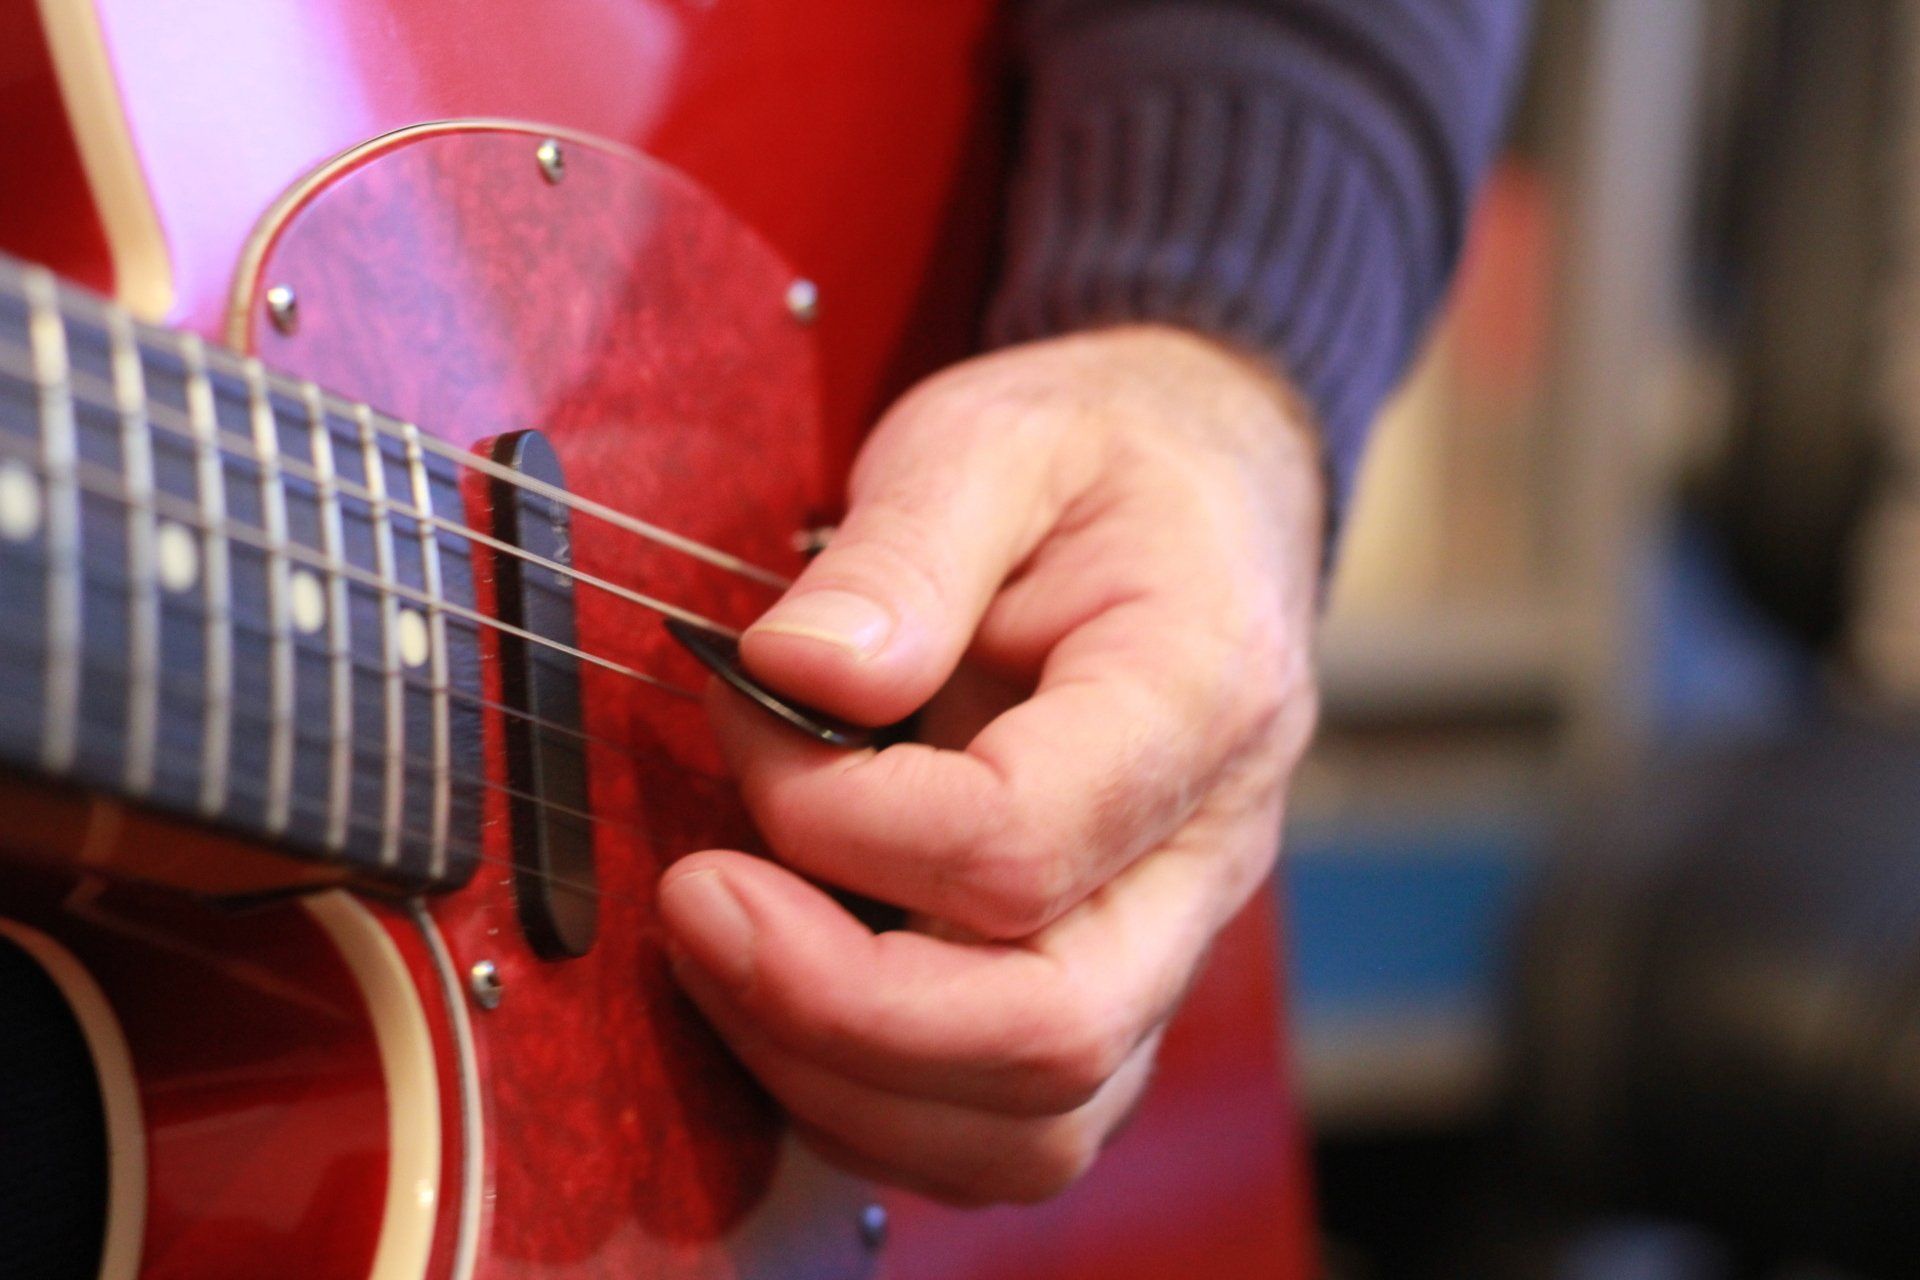 A guitarist's picking hand playing a red electric guitar